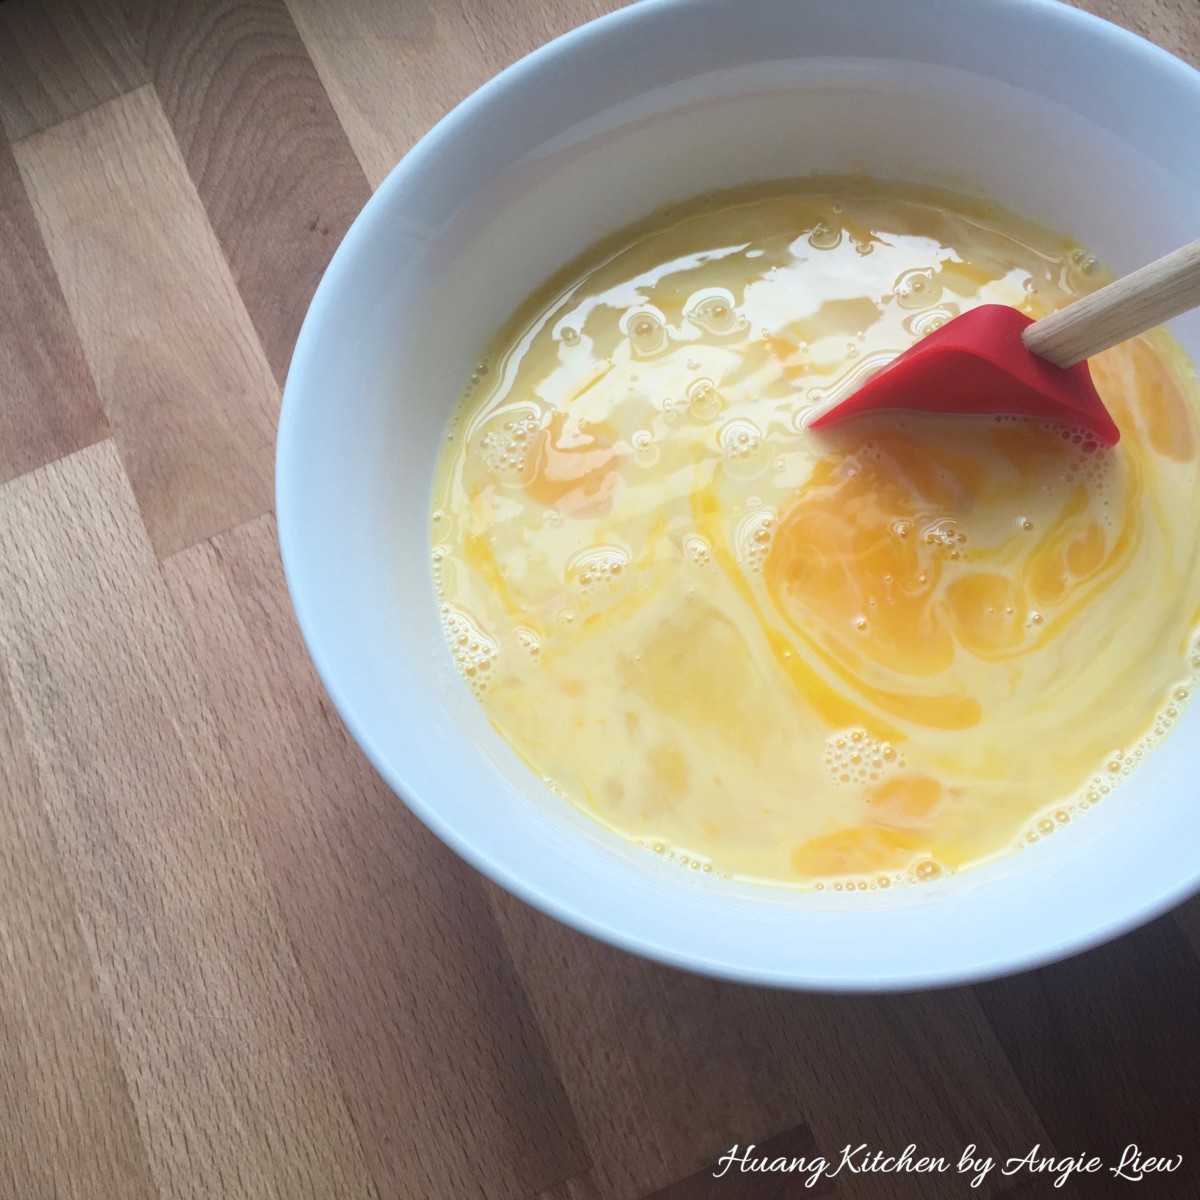 Steamed Egg Pudding Recipe - mix well